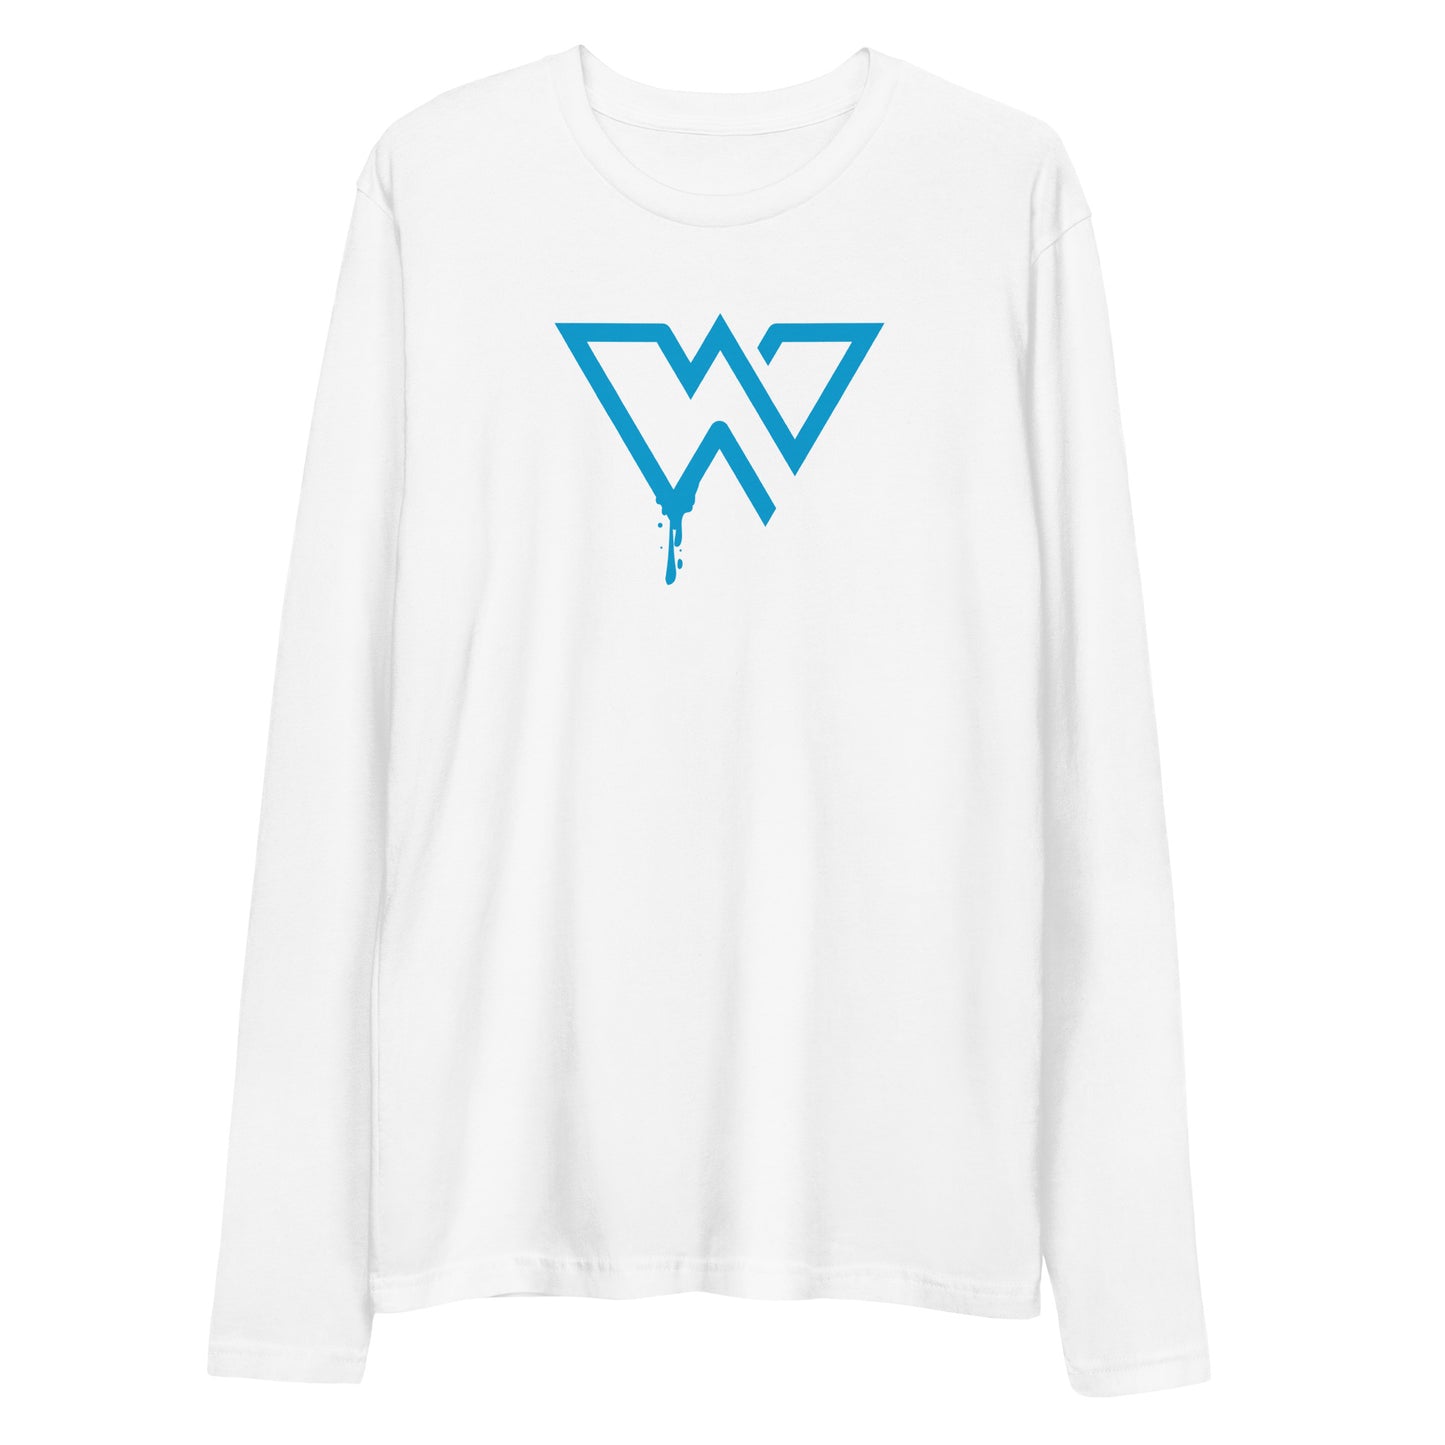 Long Sleeve "W" Fitted Crew